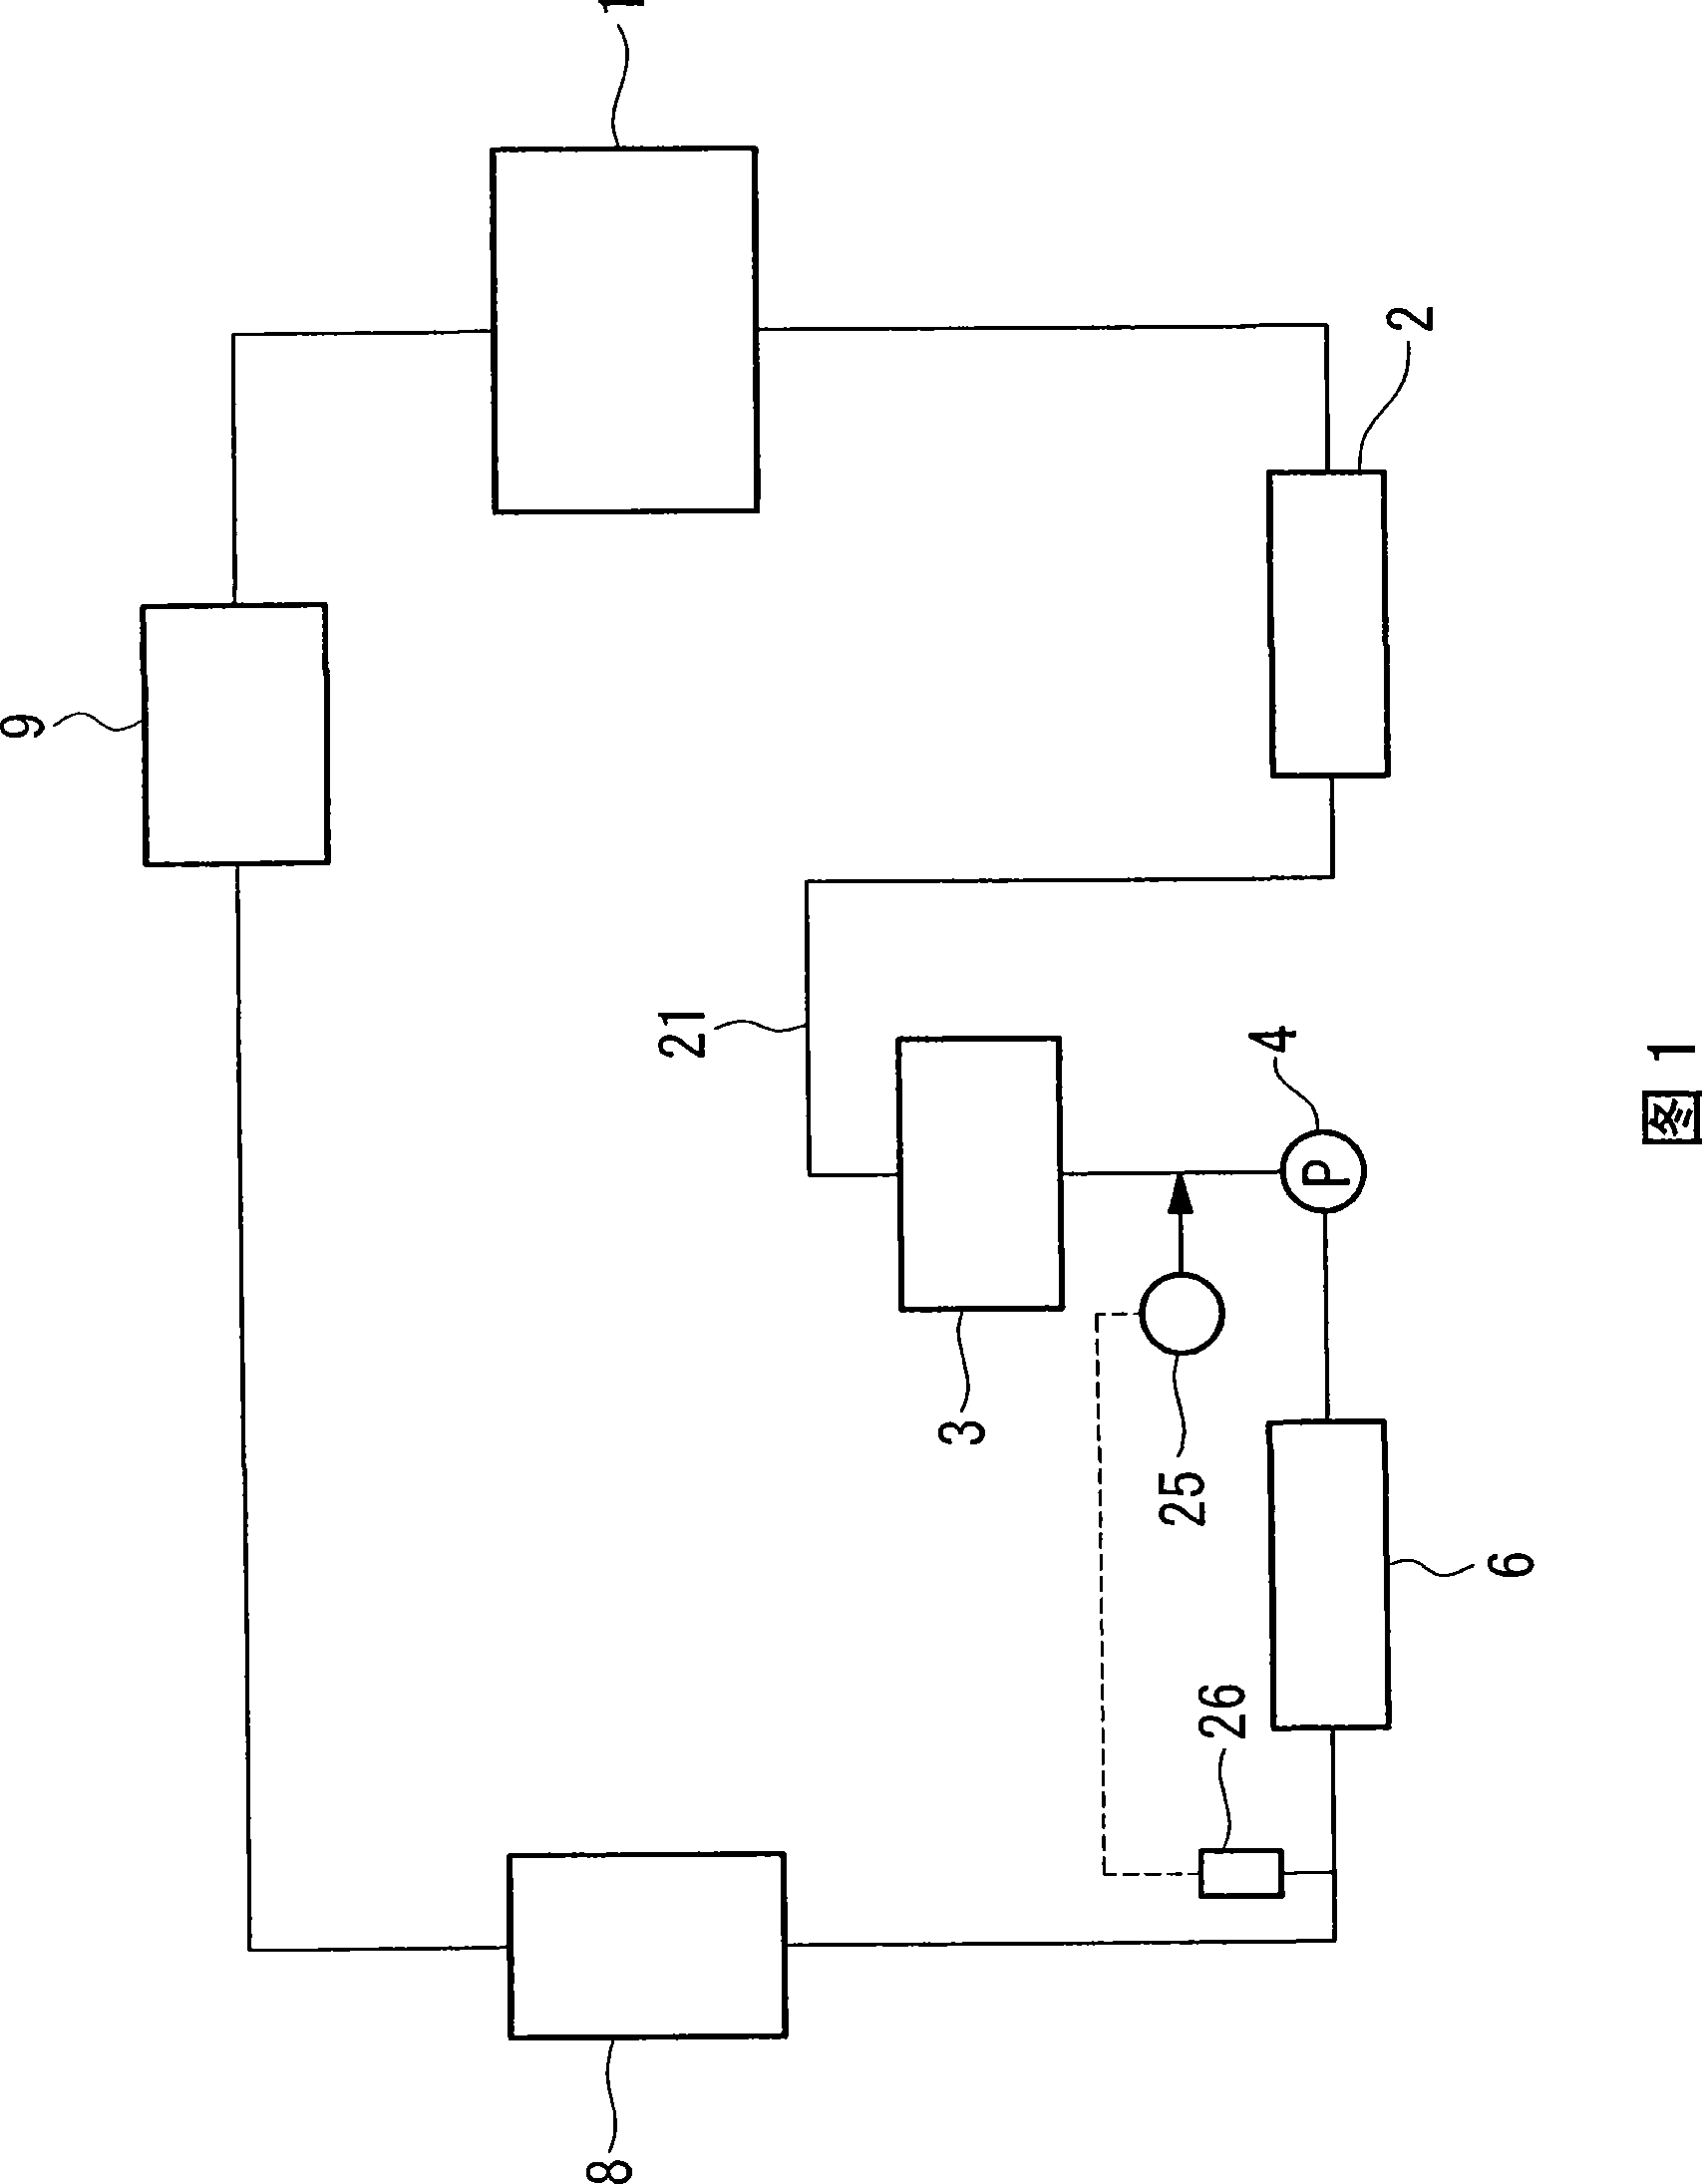 Method of water treatment in steam plant